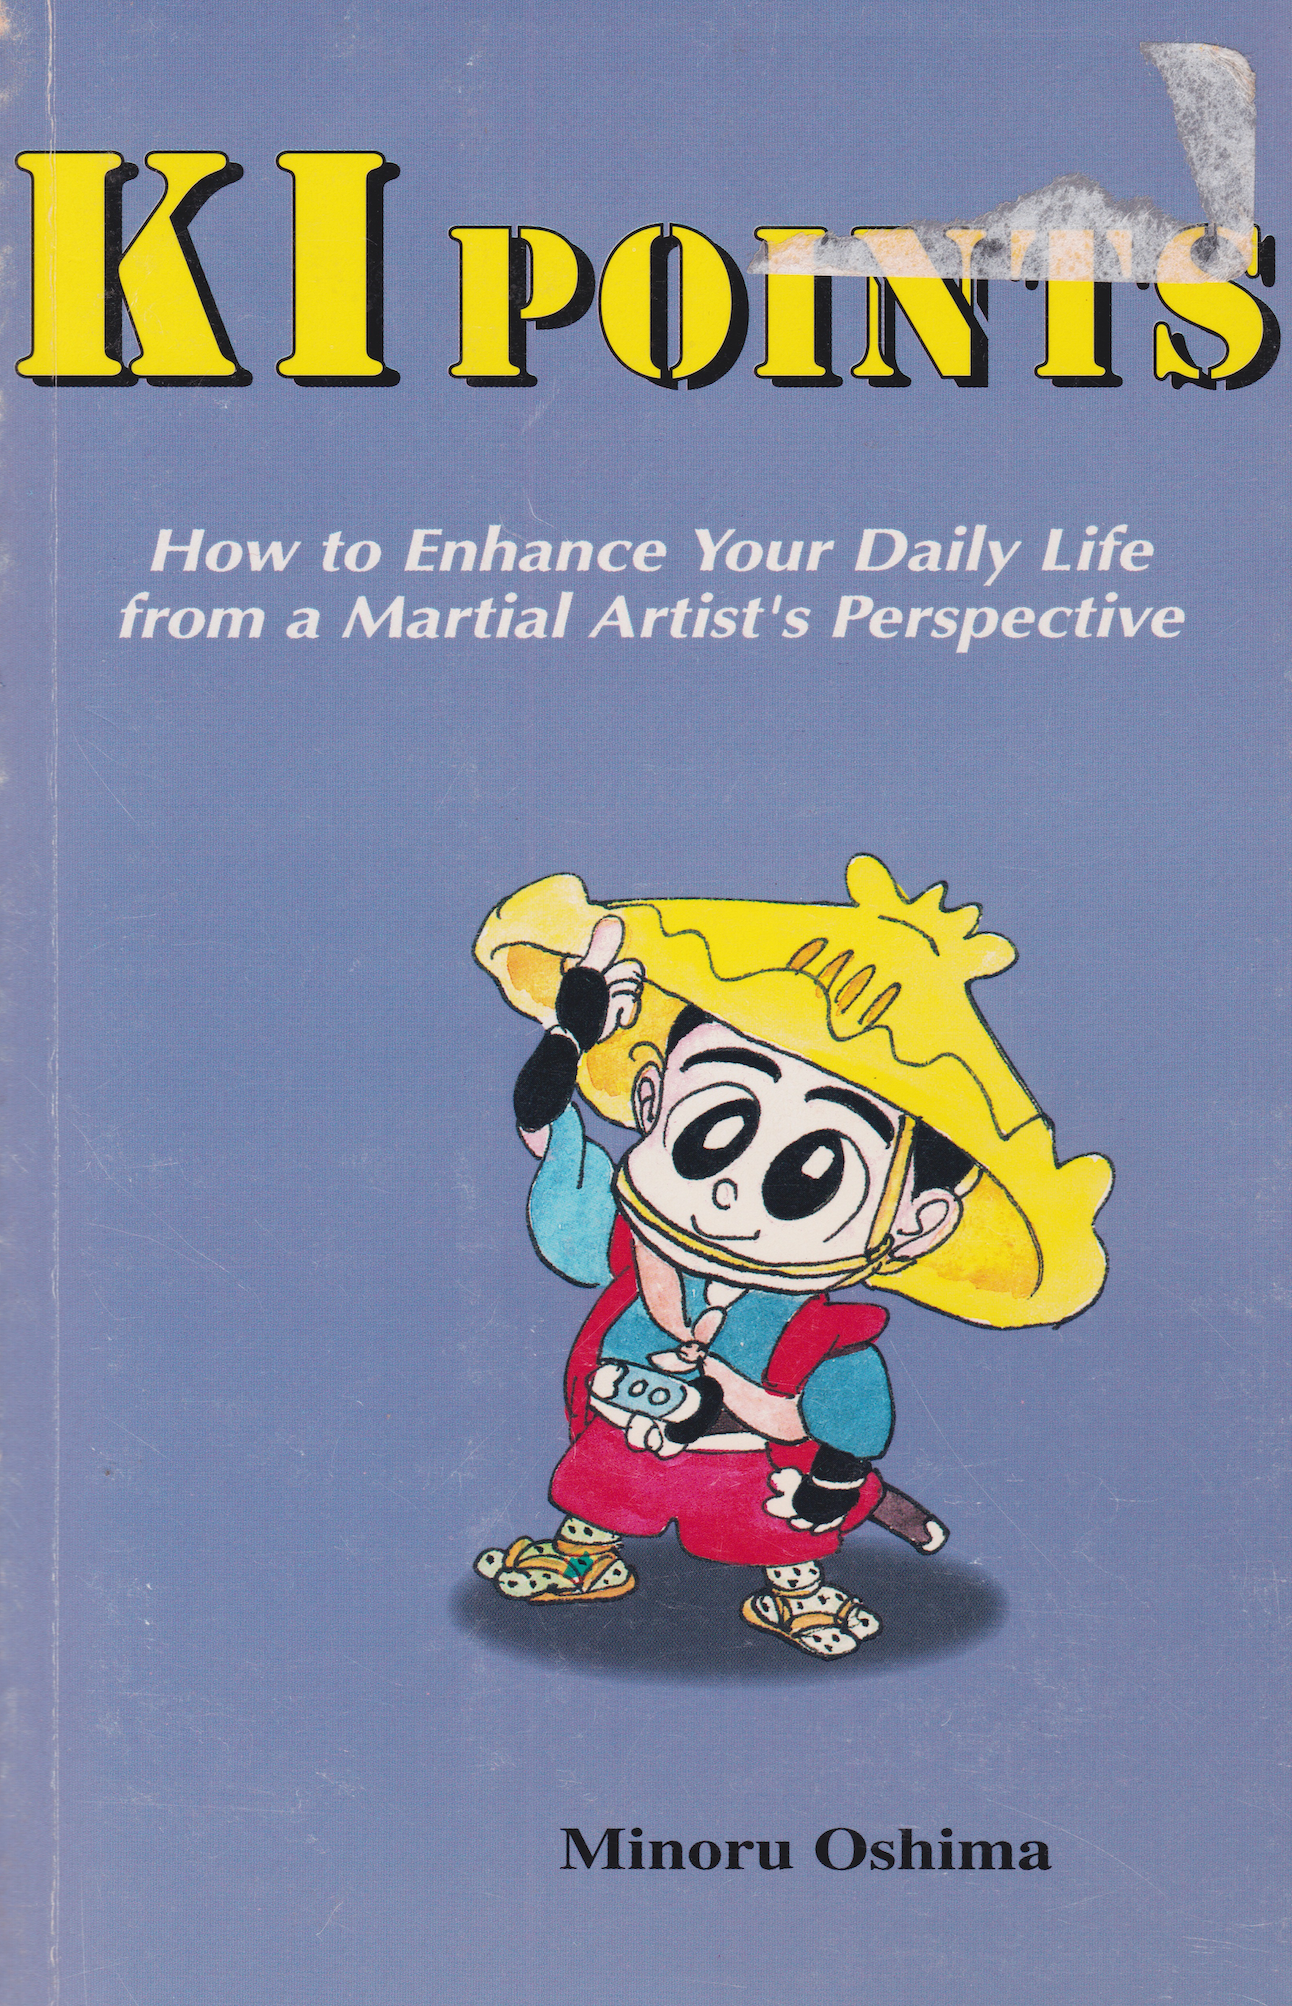 Ki Points: How to Enhance Your Daily Life from a Martial Artist's Perspective Book by Minoru Oshima (Preowned)